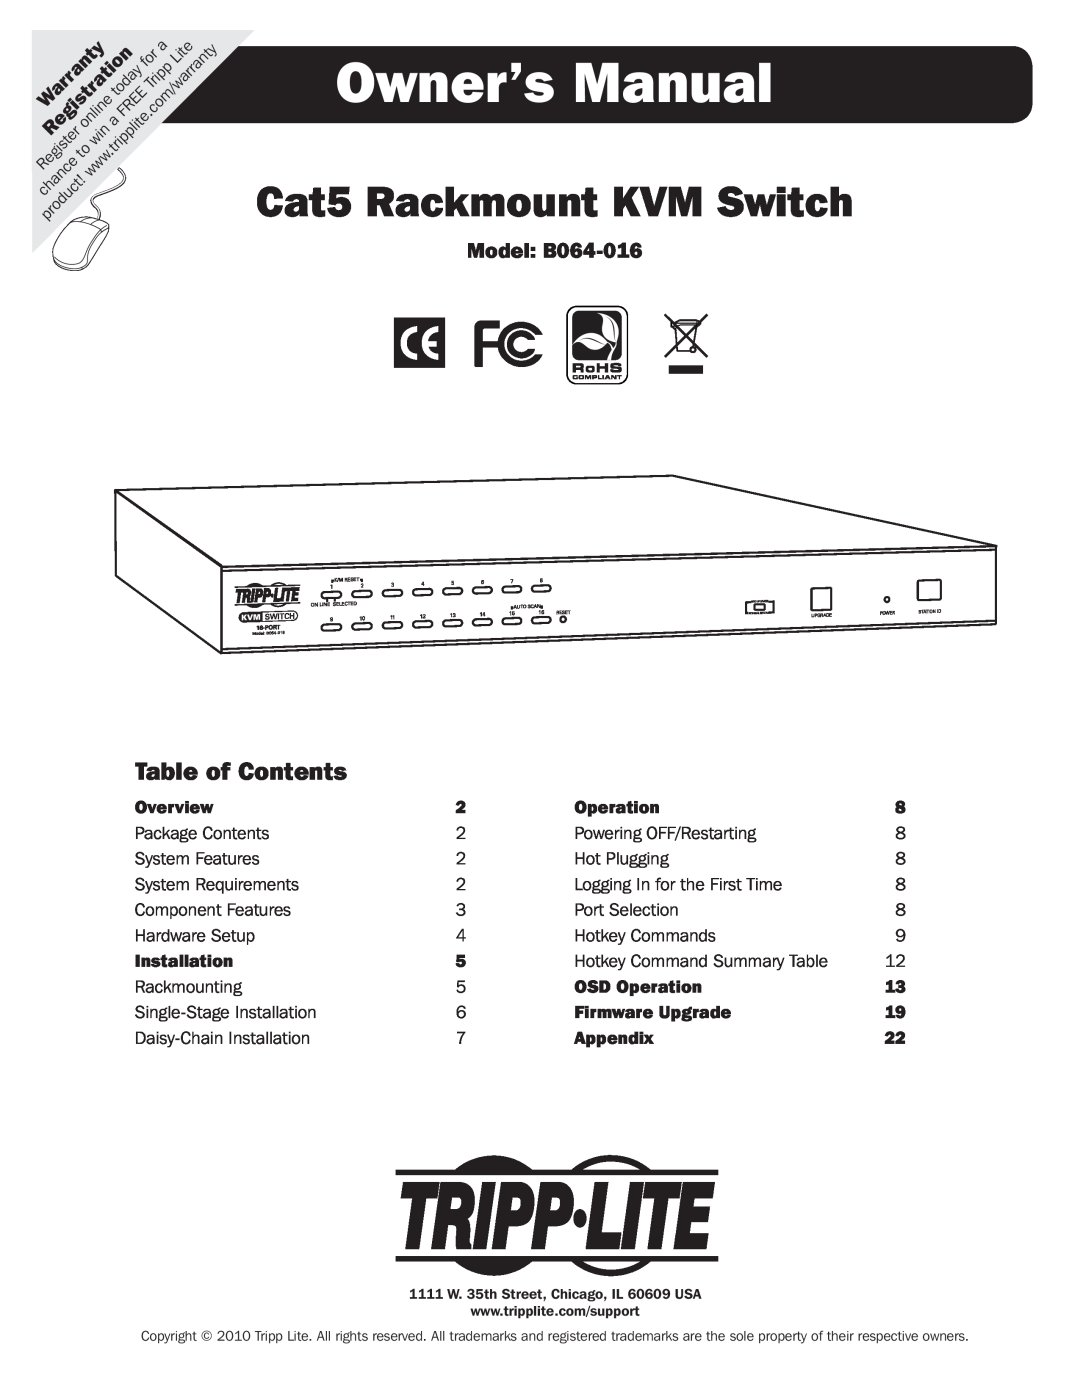 Tripp Lite owner manual Model B064-016, Overview, Installation, OSD Operation, Firmware Upgrade, Appendix 